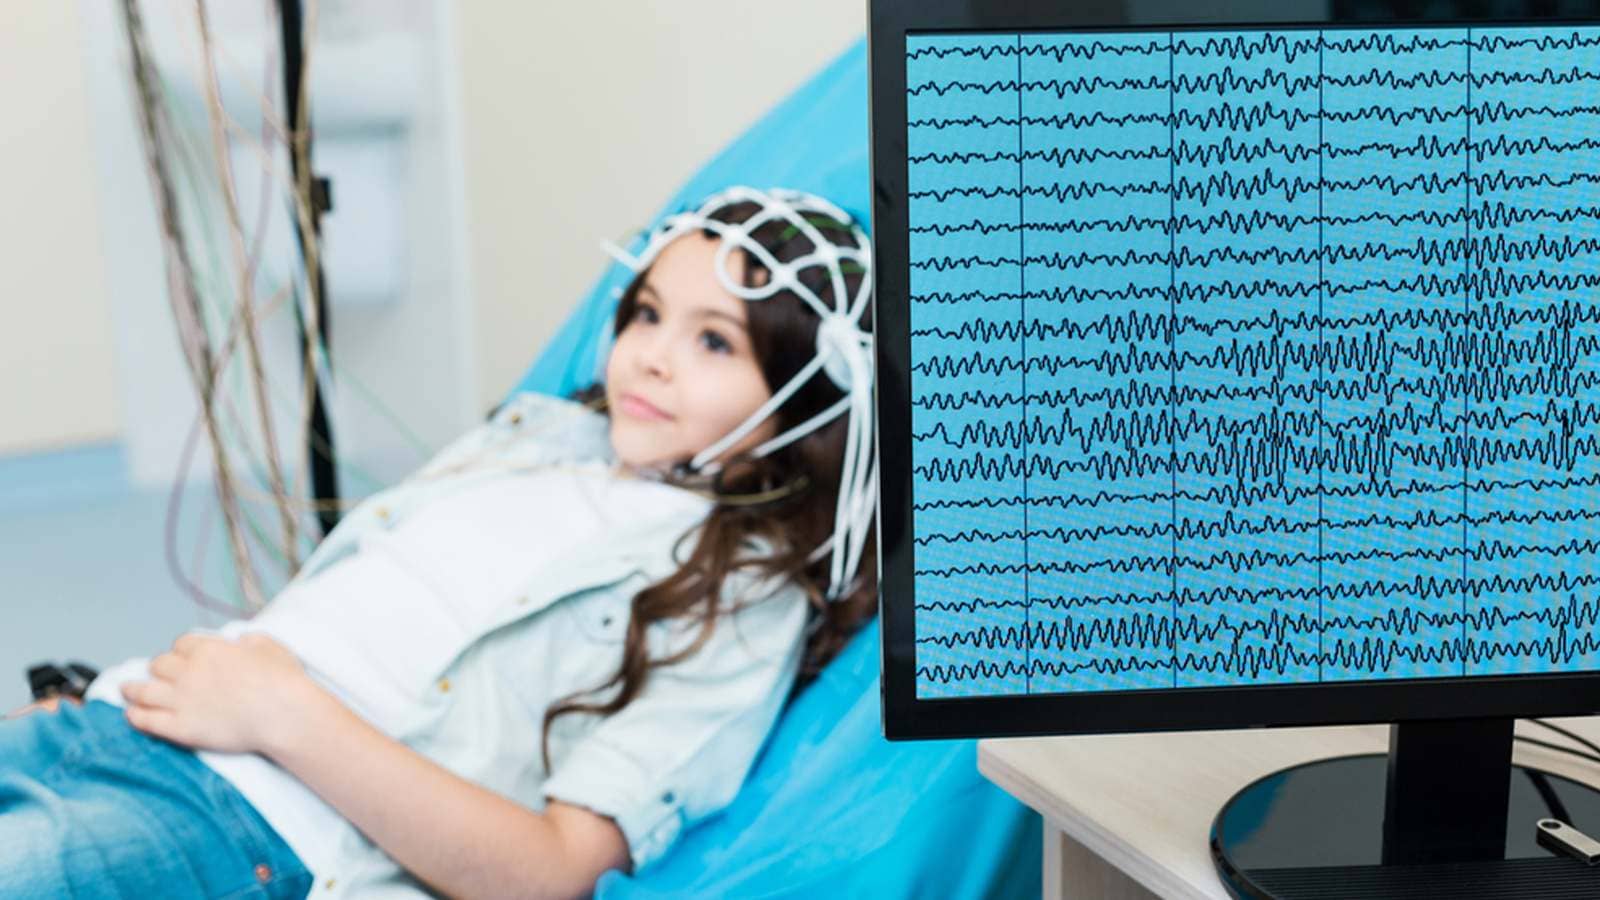 Little girl with her brain waves recorded in an EEG